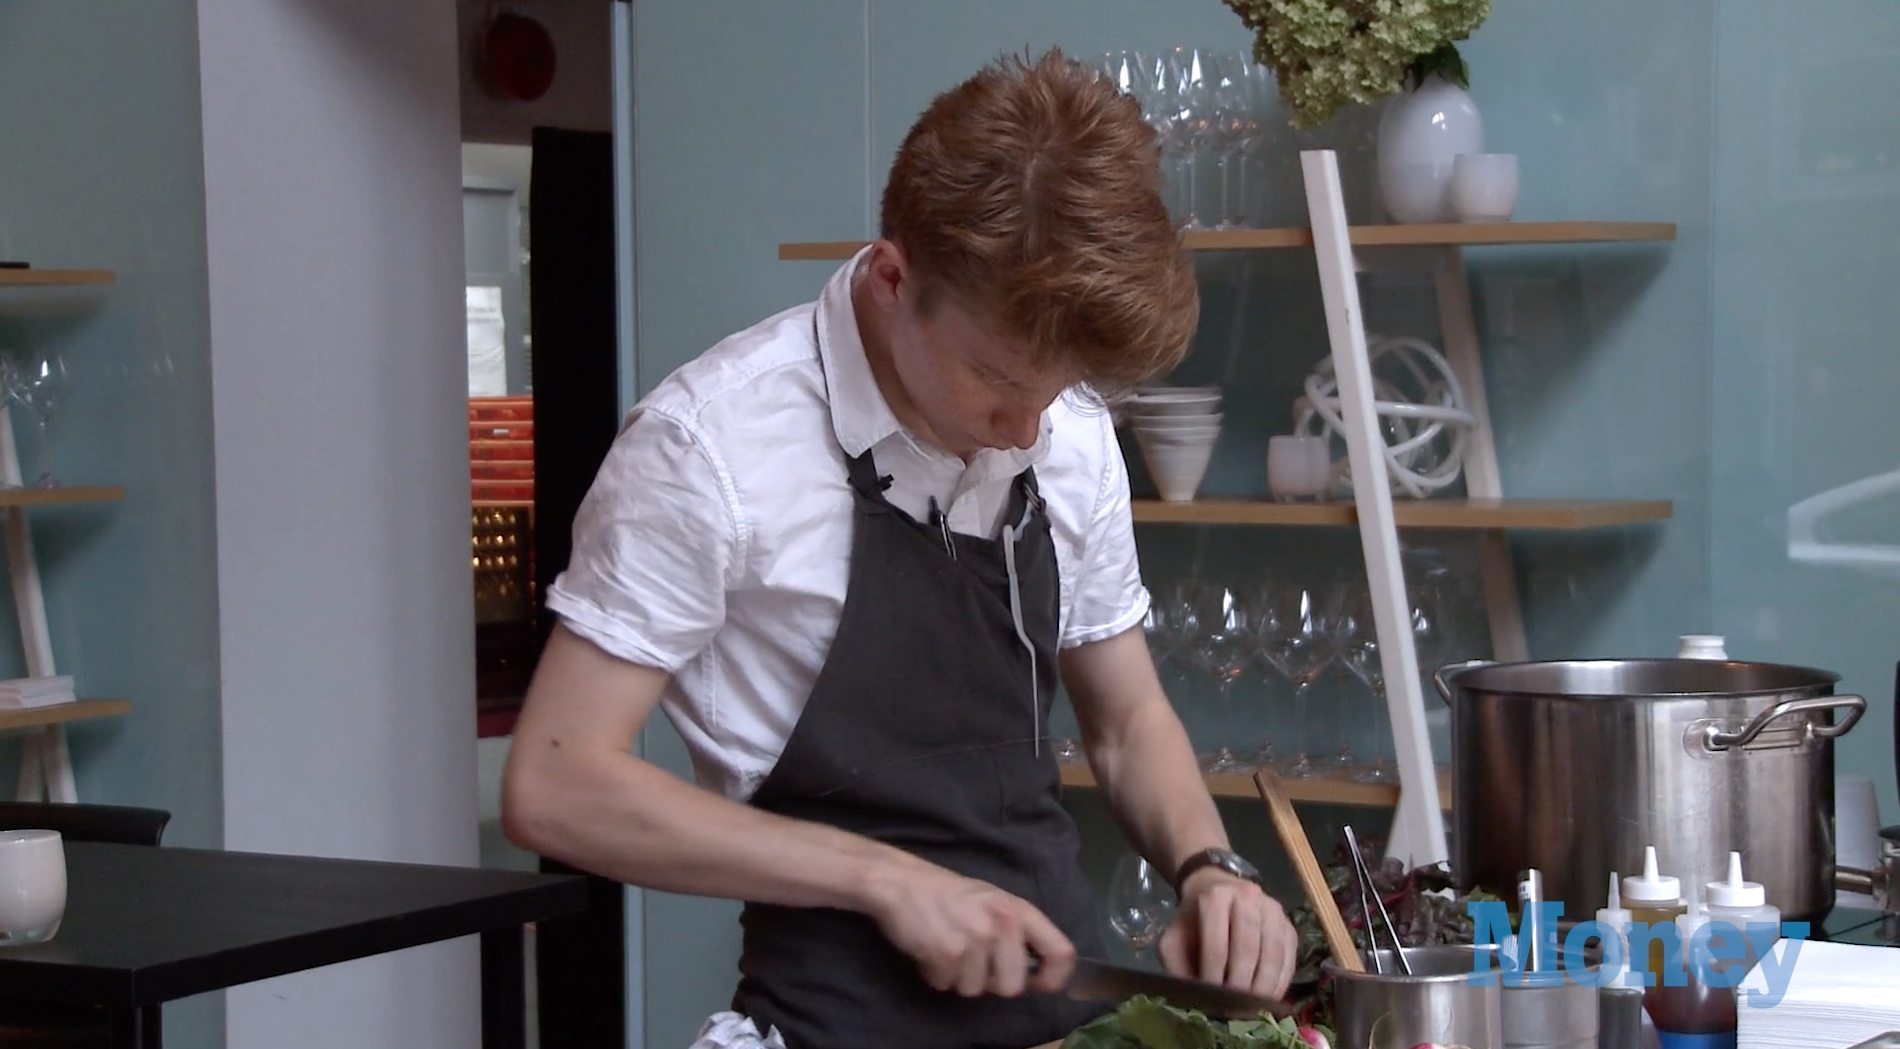 Teen Chef Serves Up Dinner...at $160 Per Person